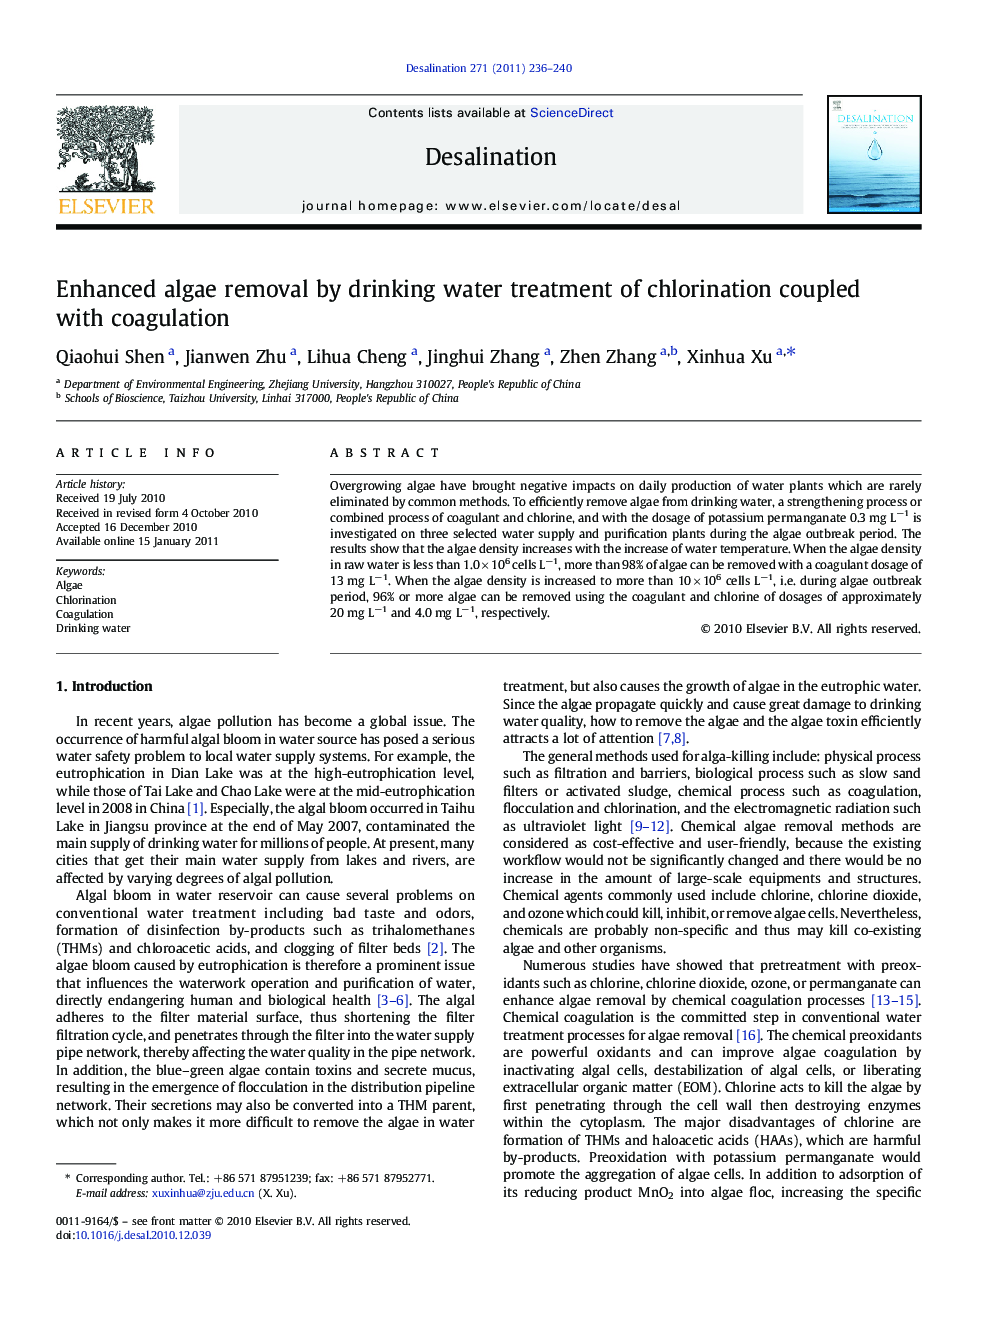 Enhanced algae removal by drinking water treatment of chlorination coupled with coagulation